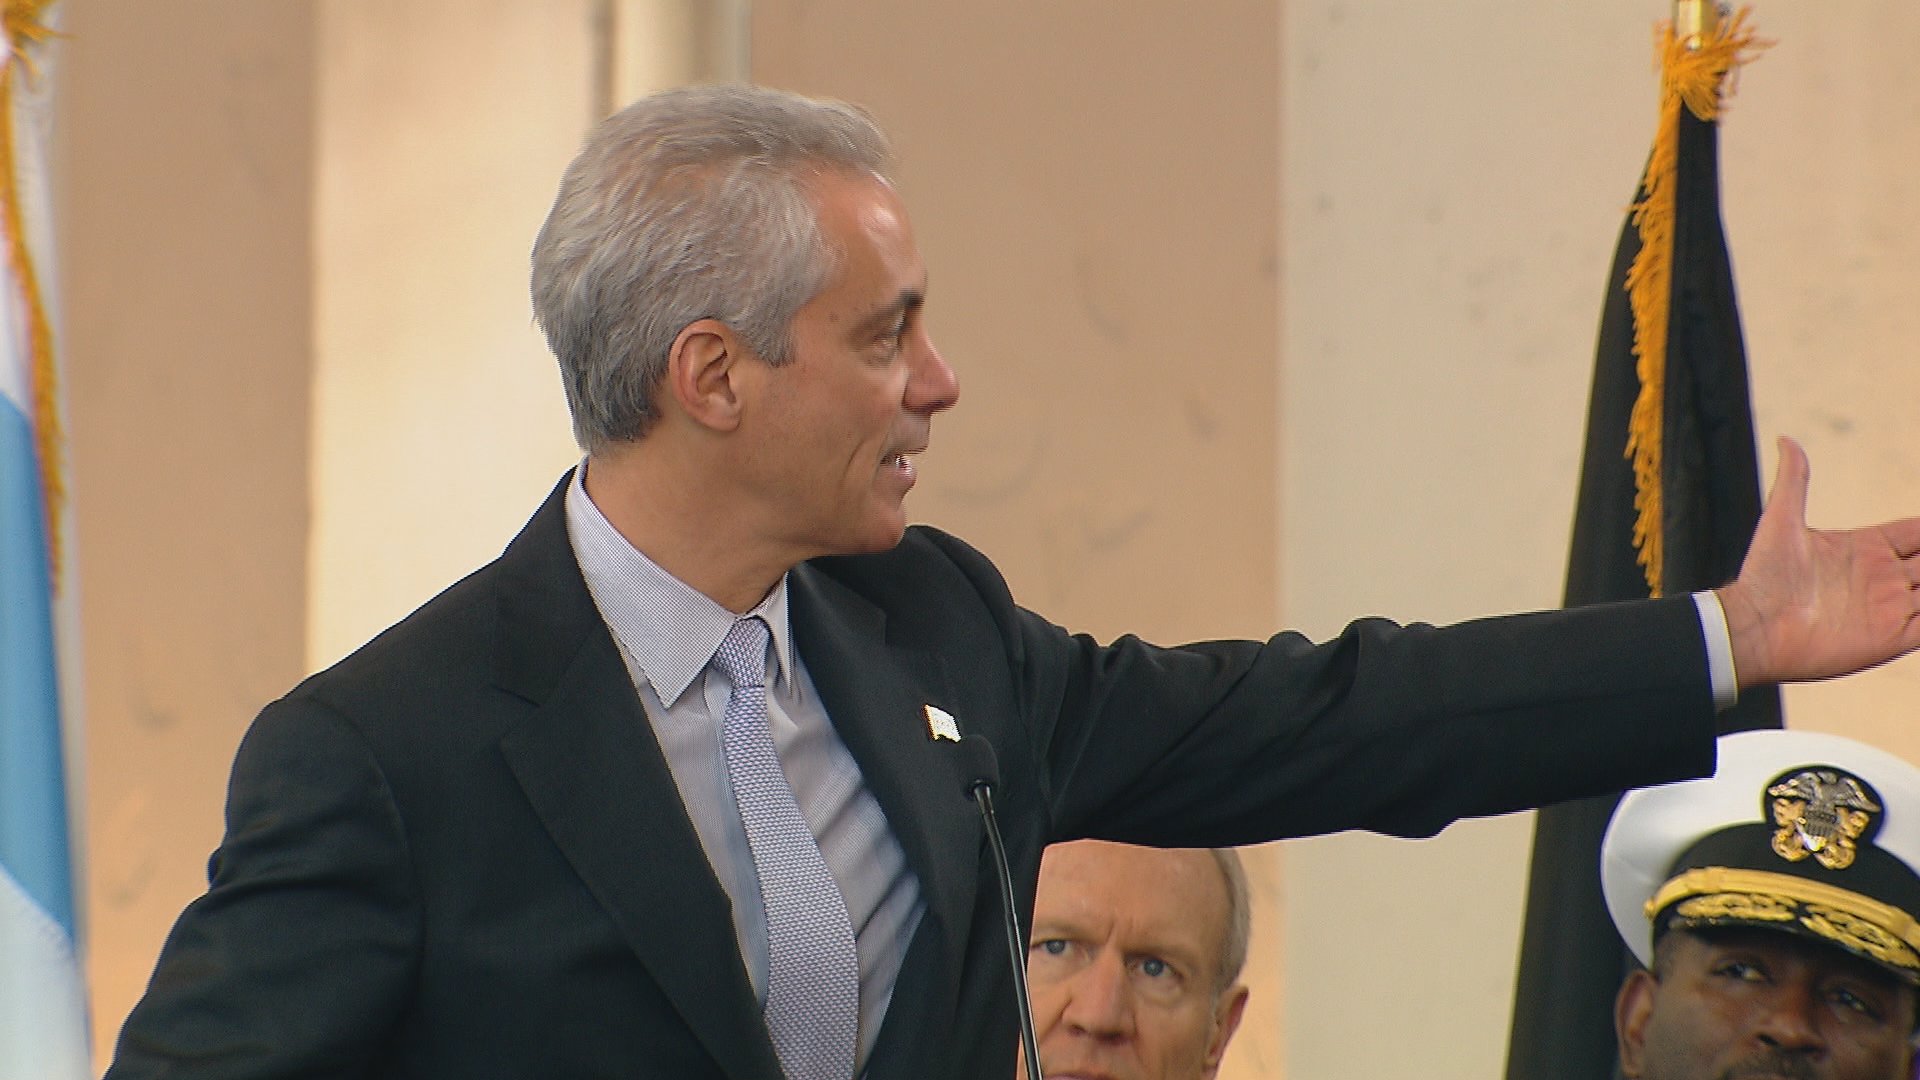 Mayor Rahm Emanuel announces increased CHA help for veterans at Wednesday's Veteran's Day ceremony at Soldier Field.